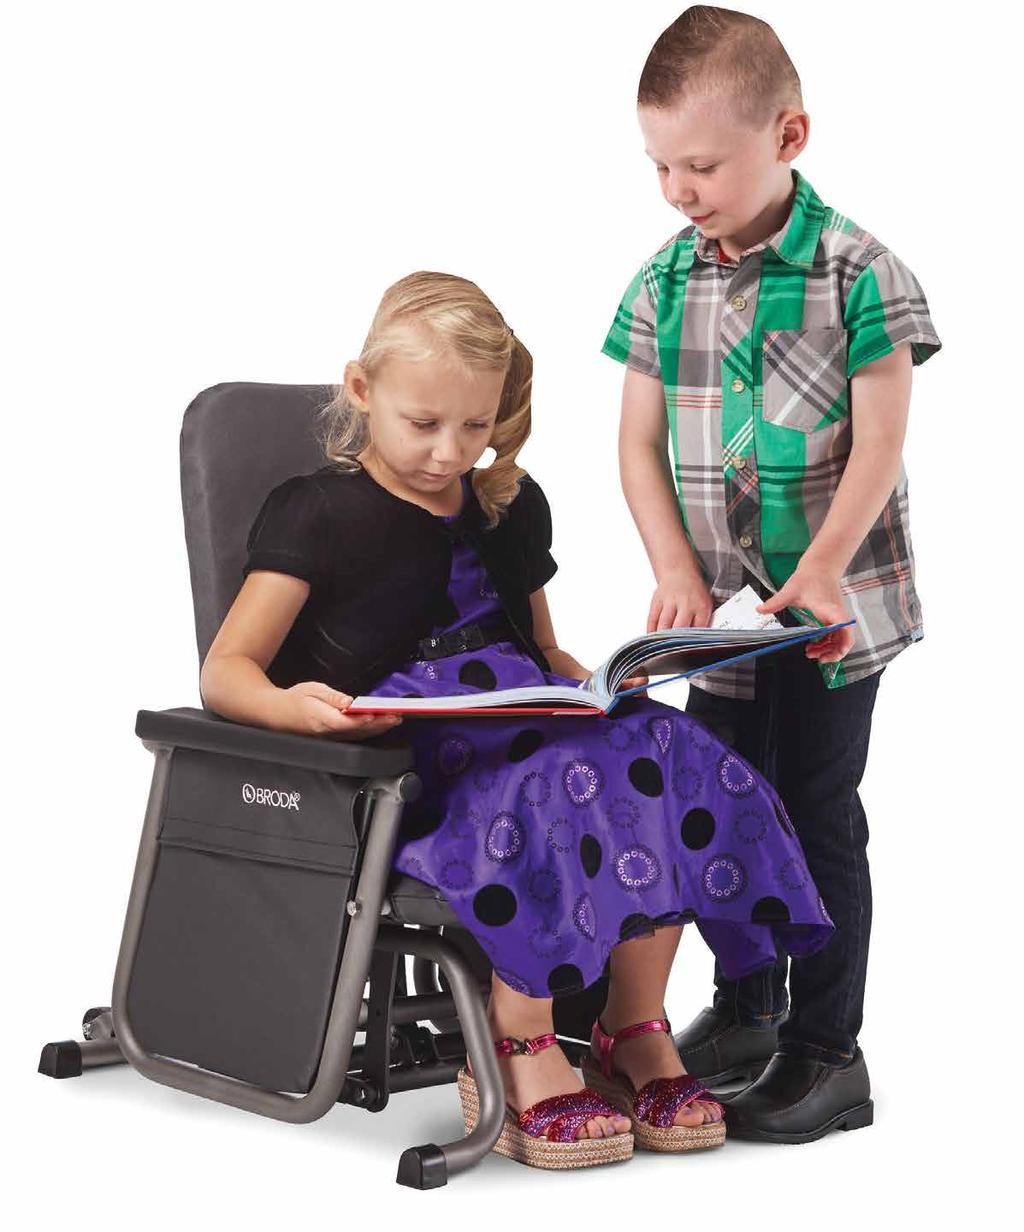 SAFETY & DURABILITY The Aspire Pediatric Glider provides unsurpassed safety and durability.